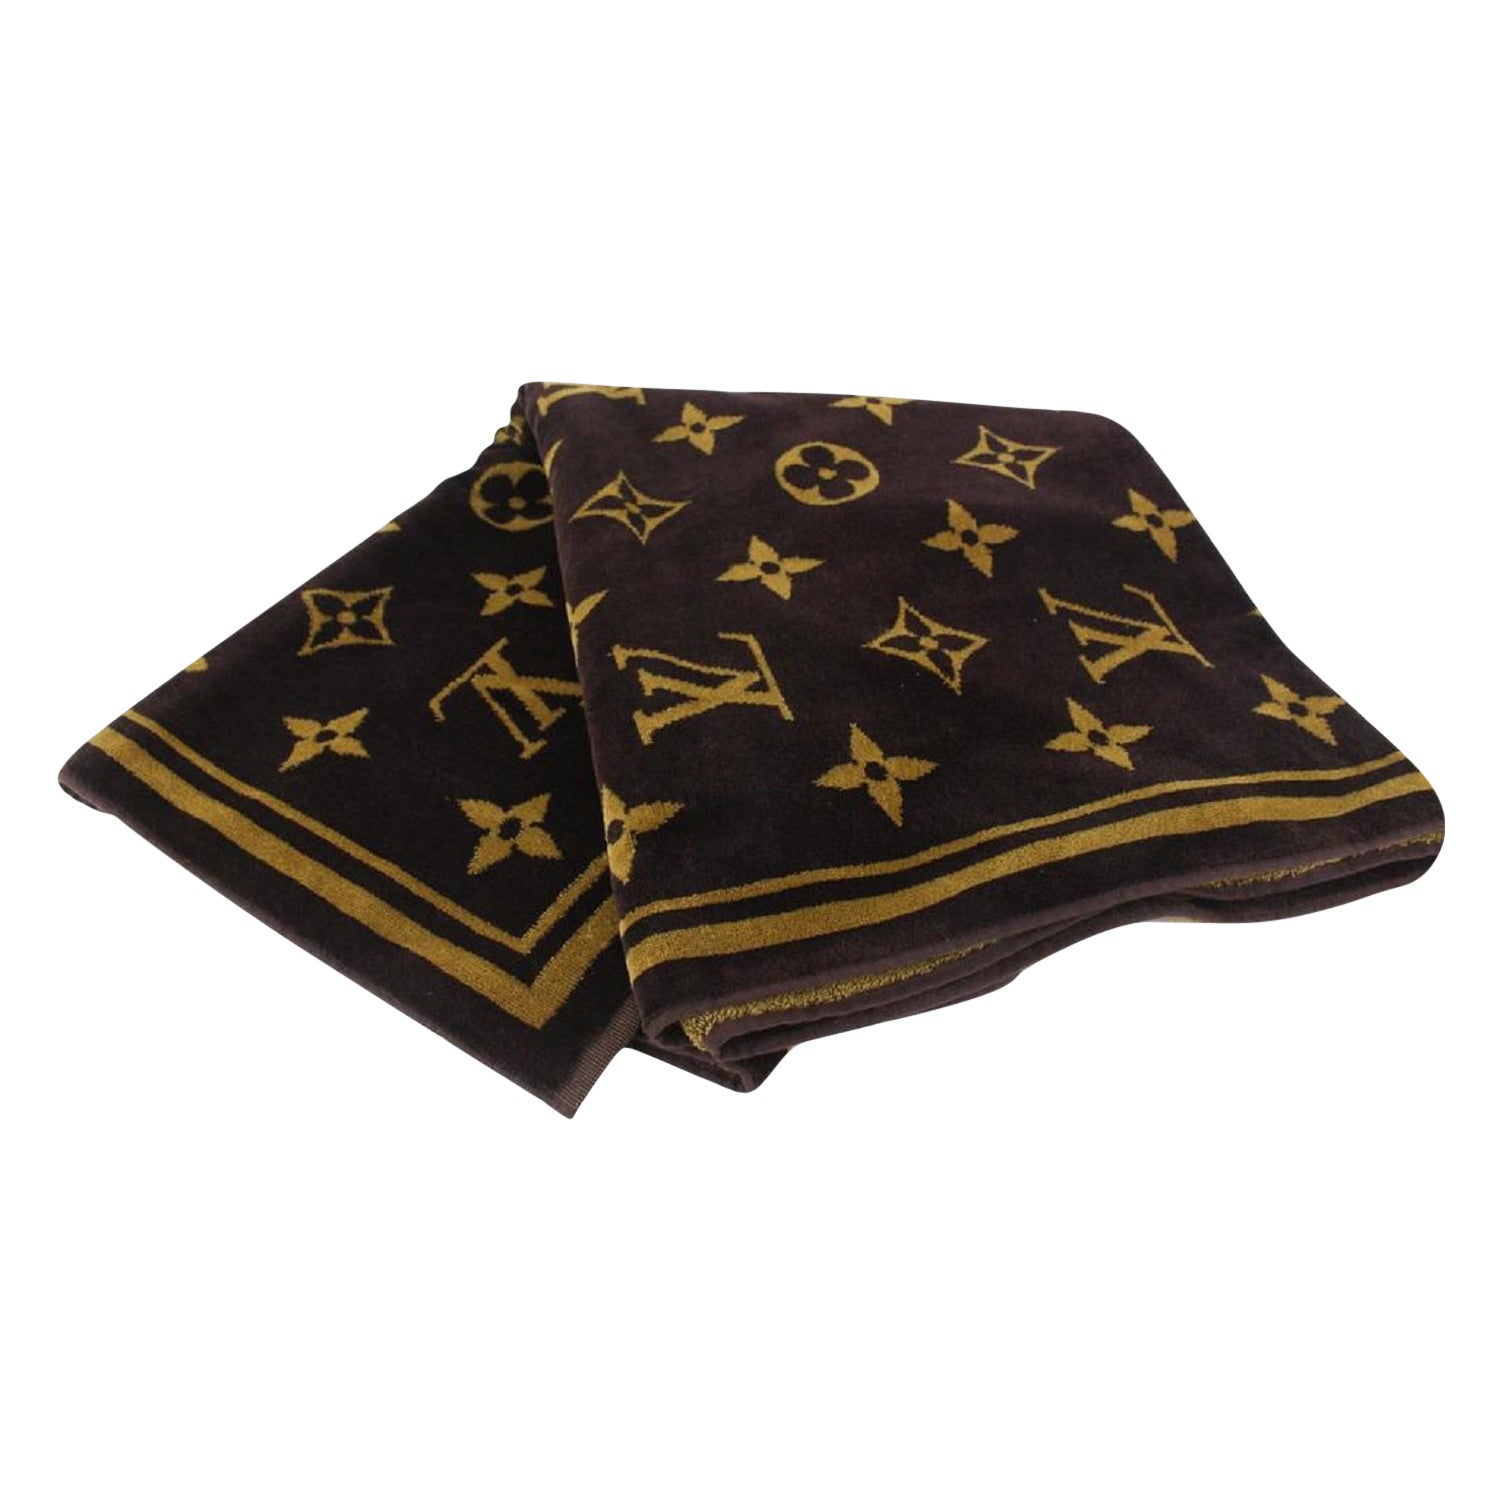 Louis Vuitton Towel - 8 For Sale on 1stDibs  louis vuitton towels price, louis  vuitton beach towel, lv towel price